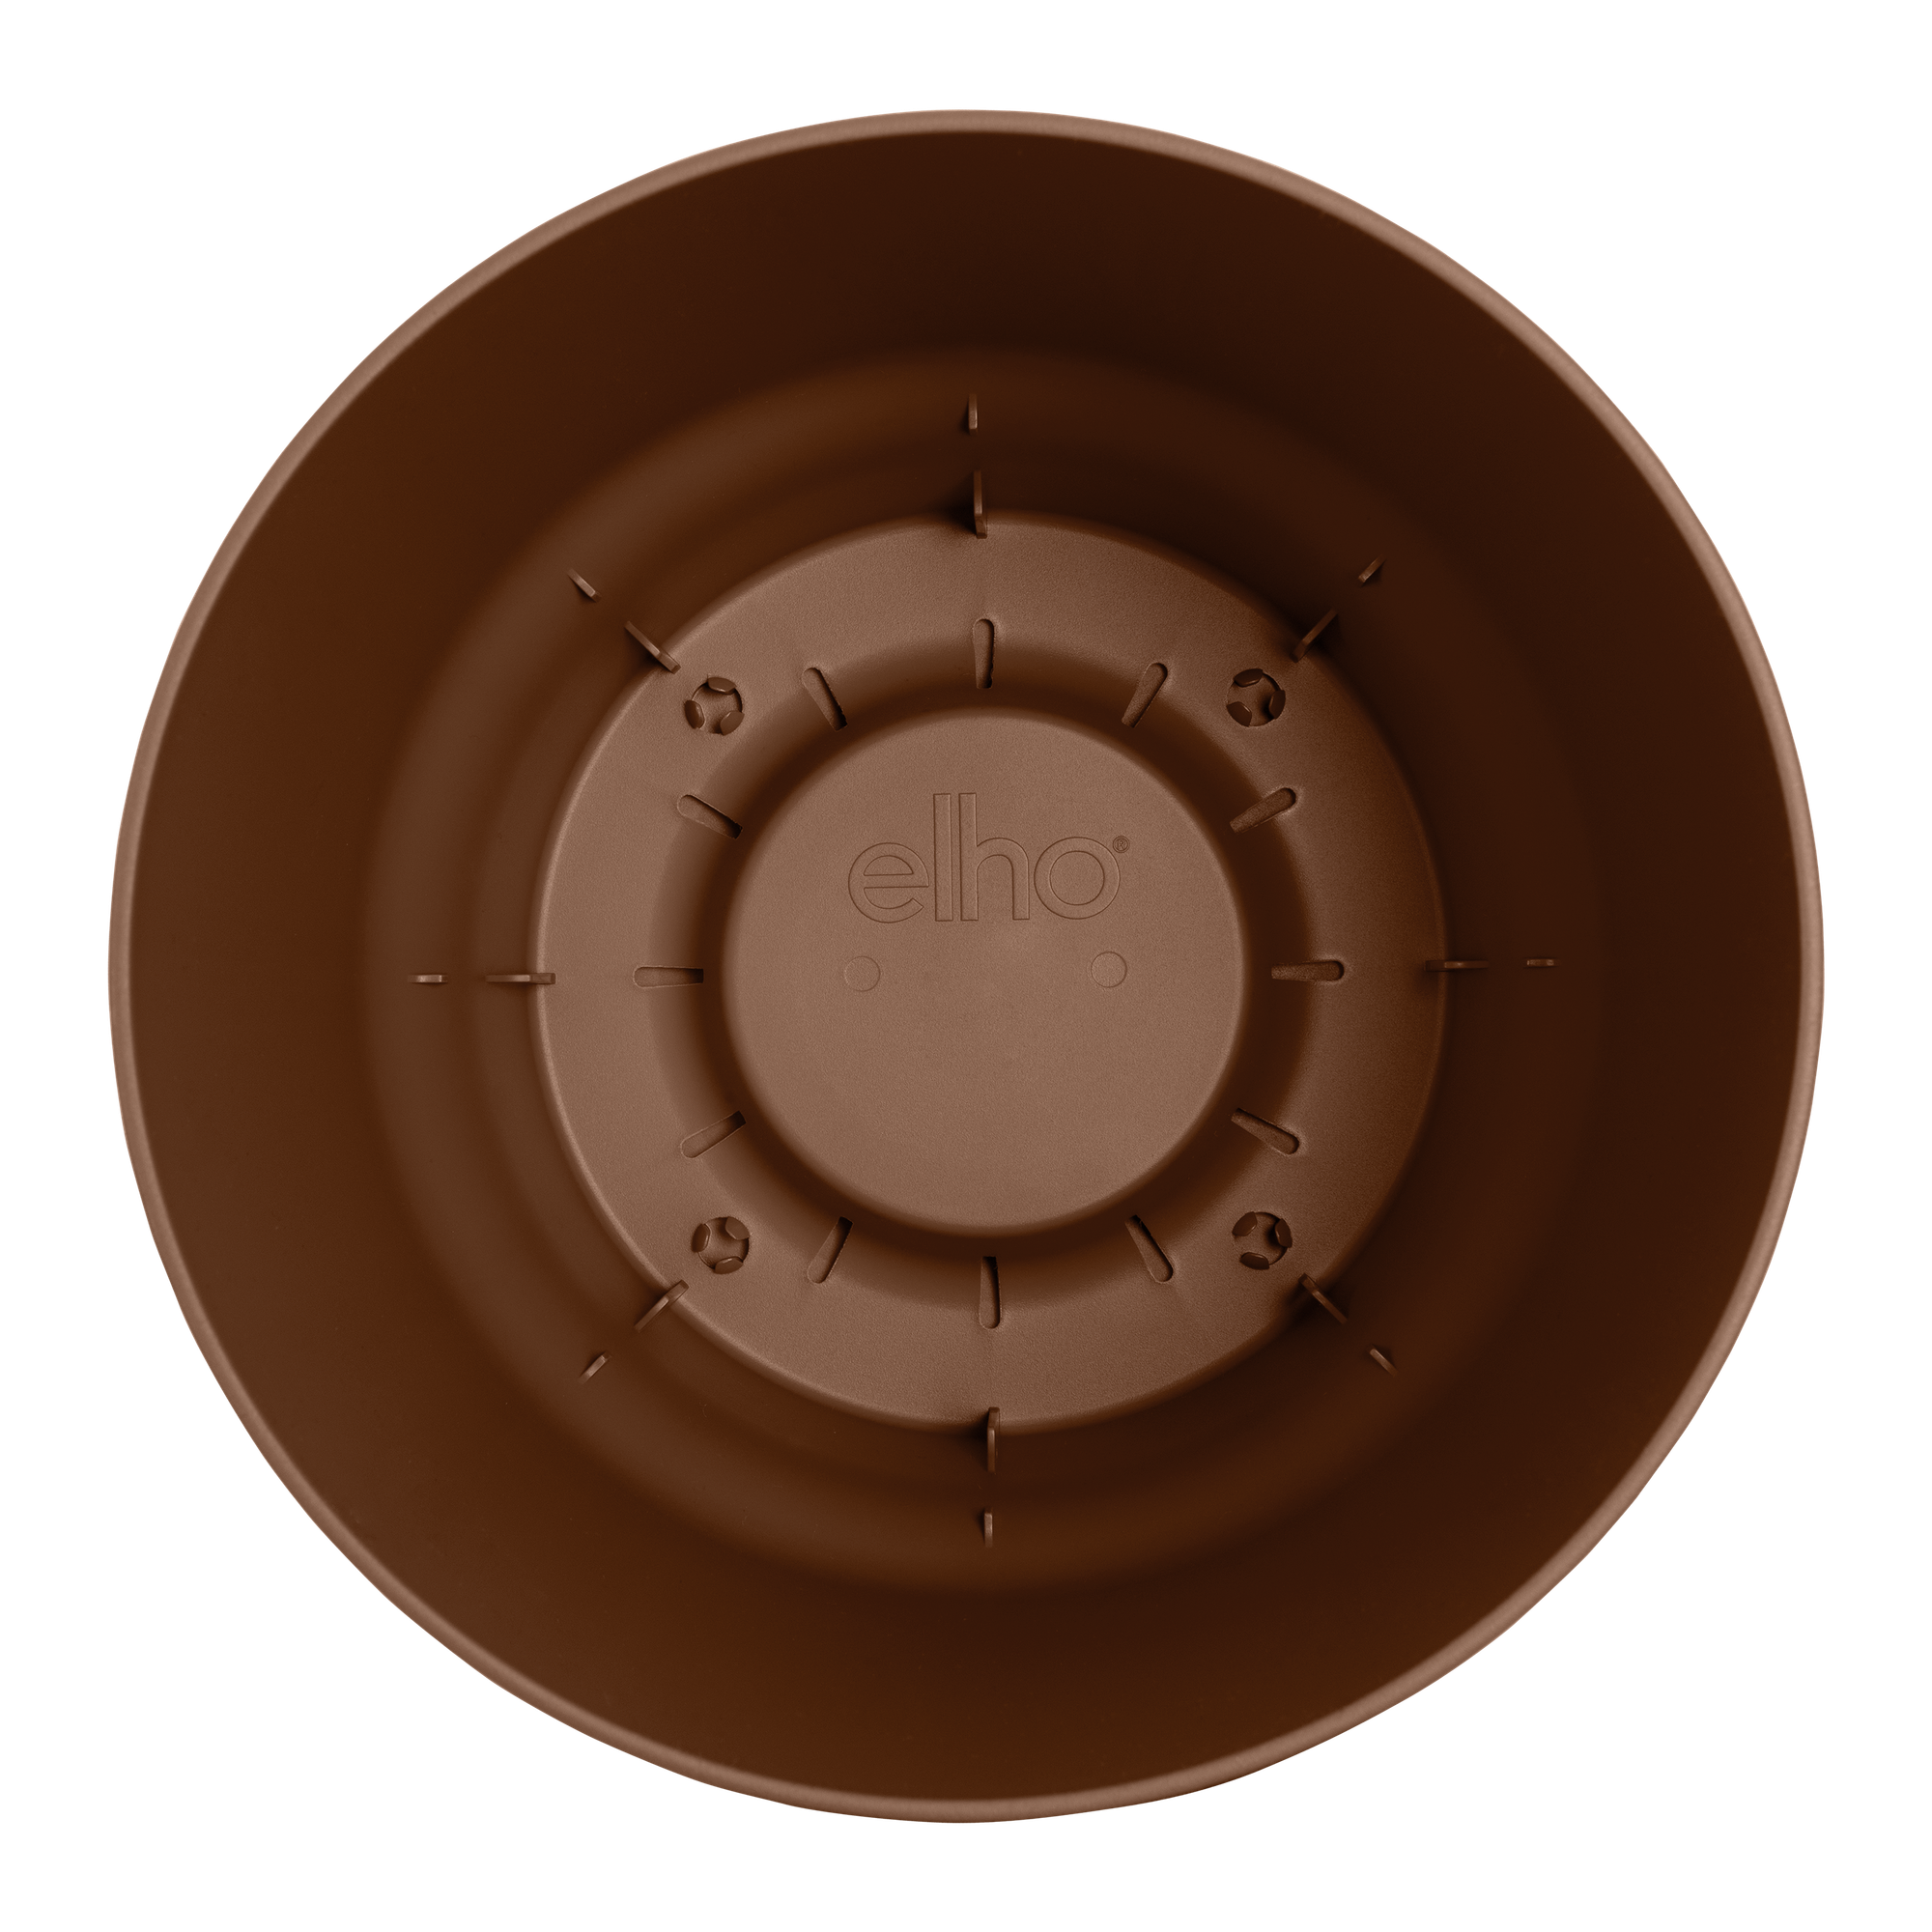 greenville round 14cm elho® nature ginger - brown - room Give to